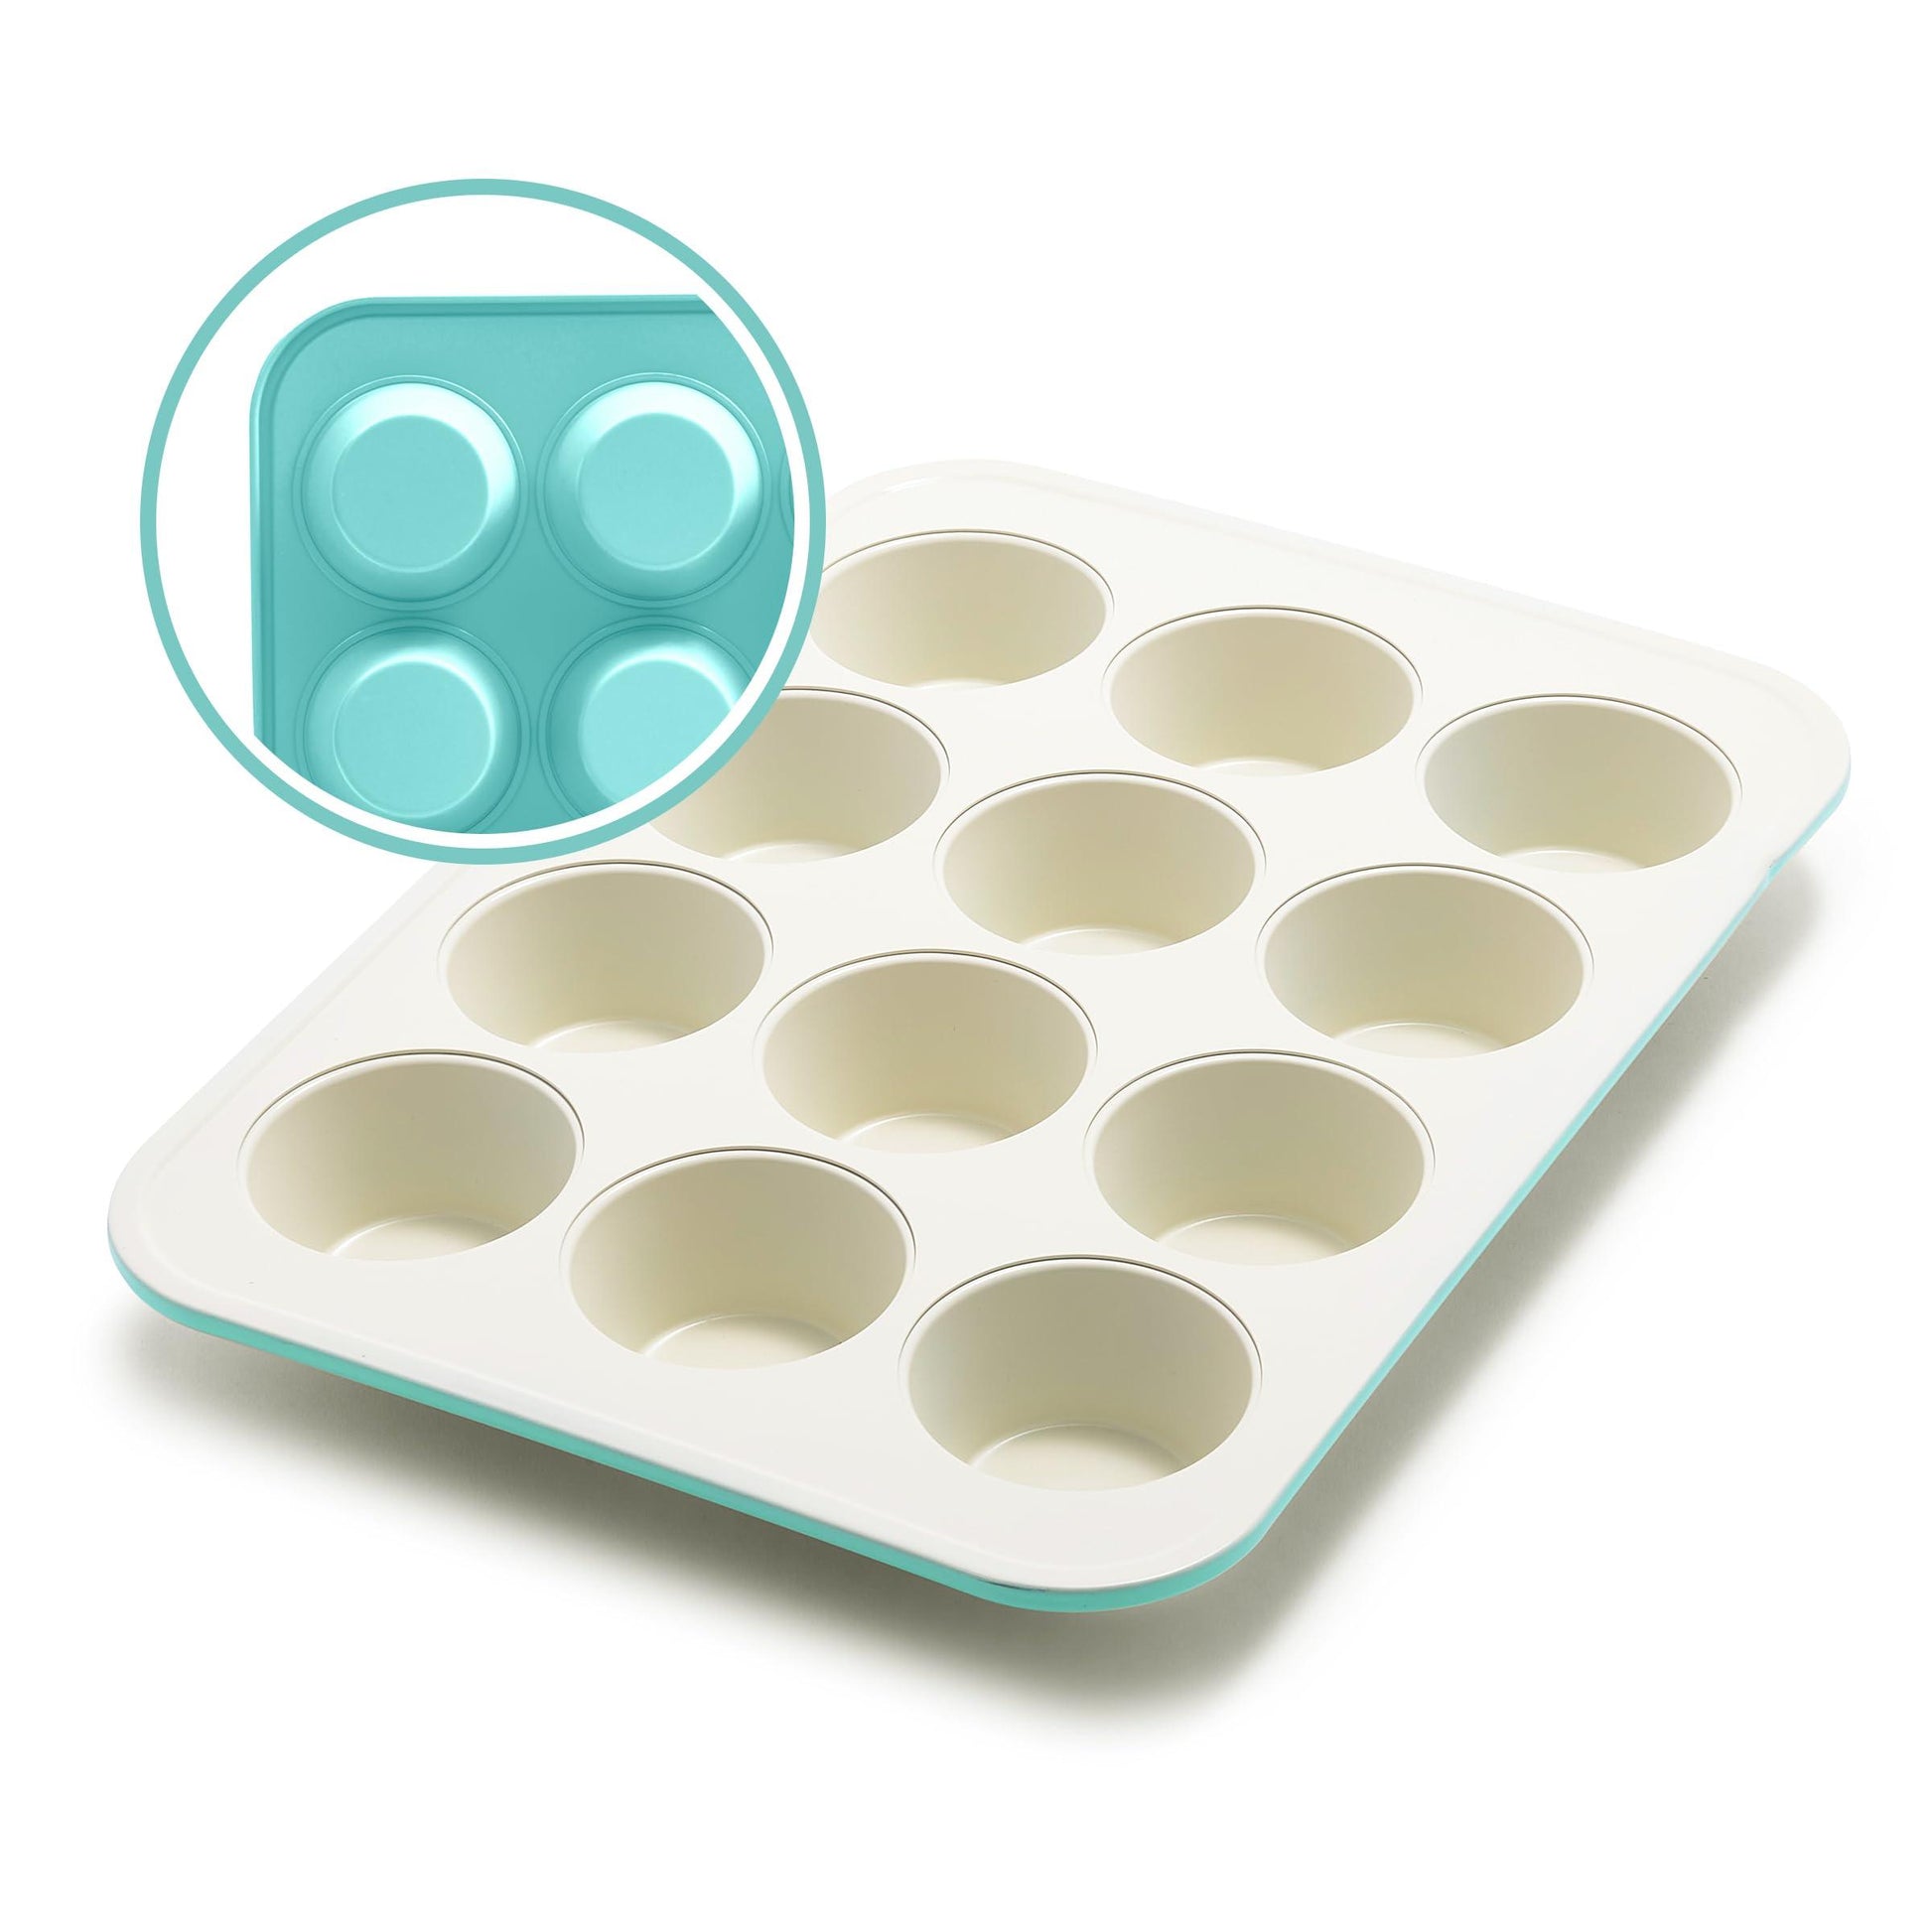 GreenLife Bakeware Healthy Ceramic Nonstick, 12 Cup Muffin and Cupcake Baking Pan, PFAS-Free, Turquoise - CookCave